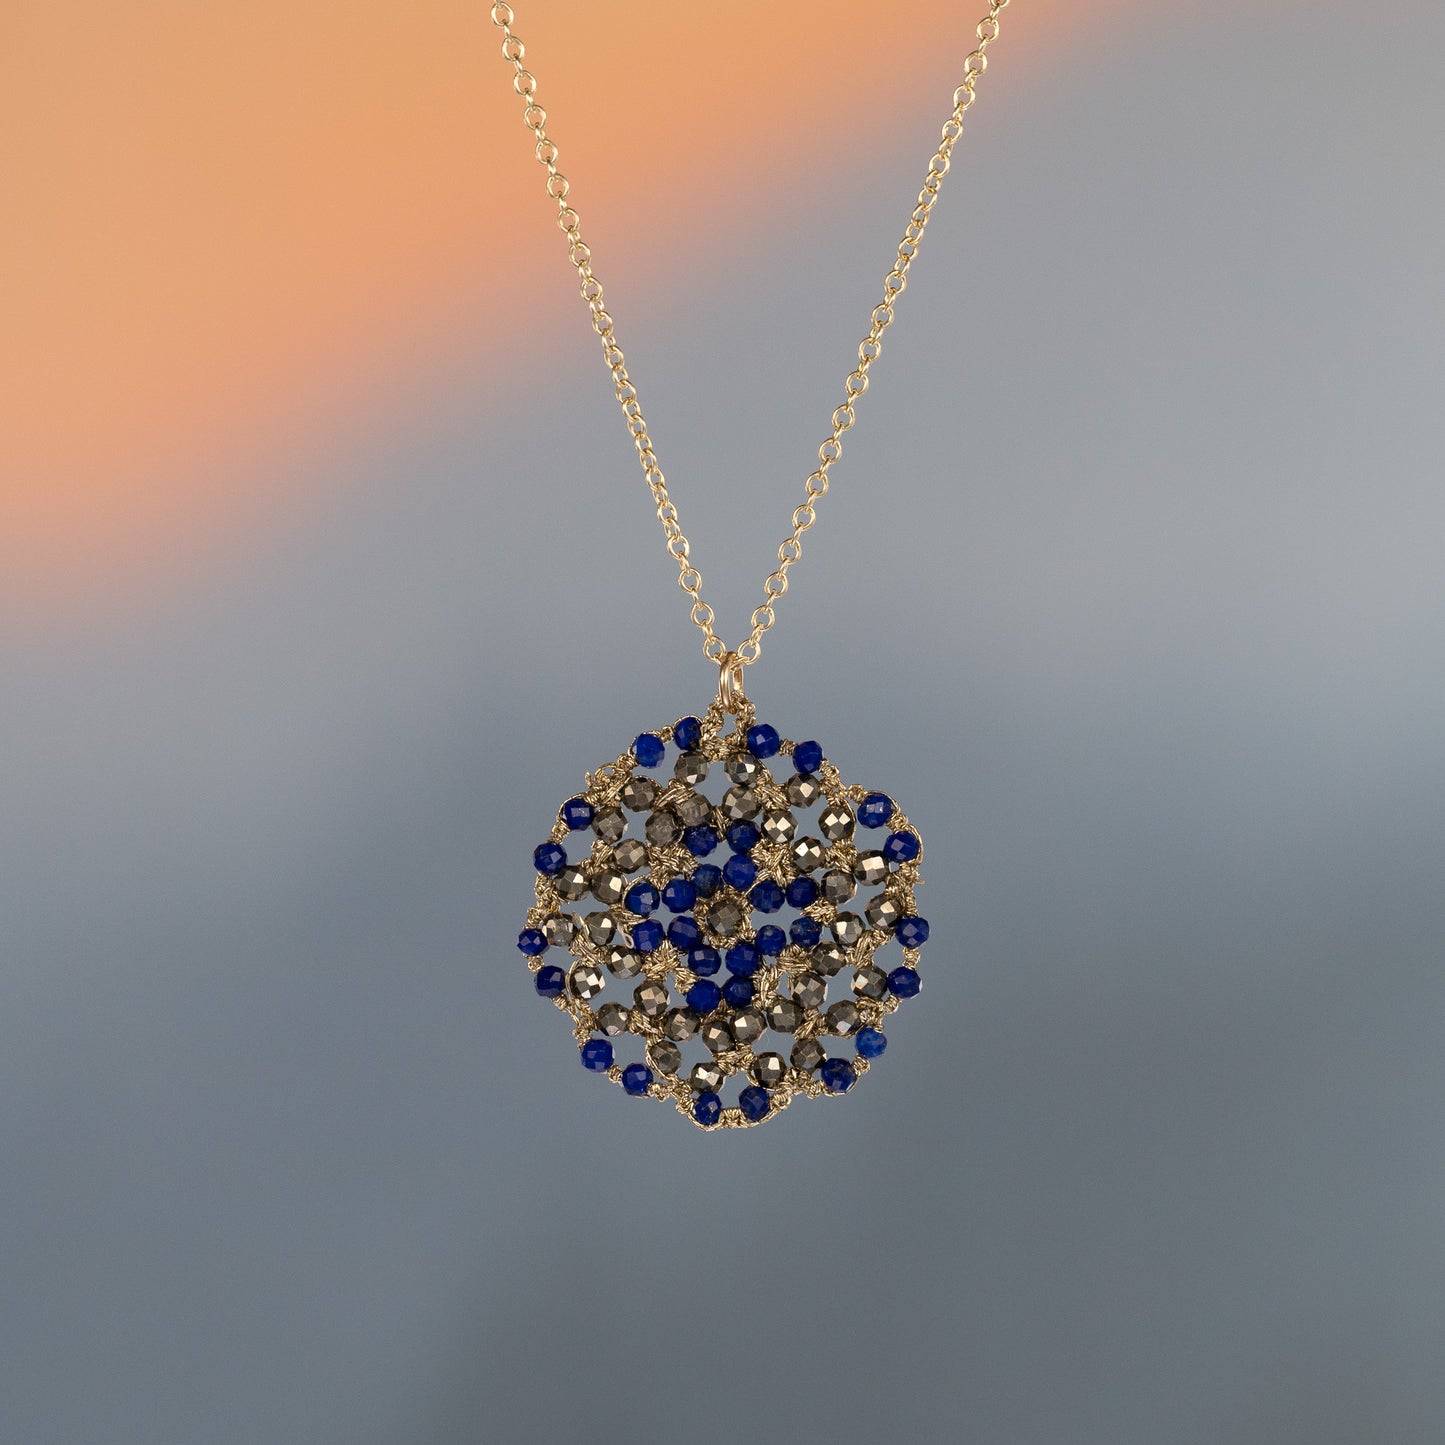 Danielle Welmond Woven Lapis and Pyrite Coin Necklace